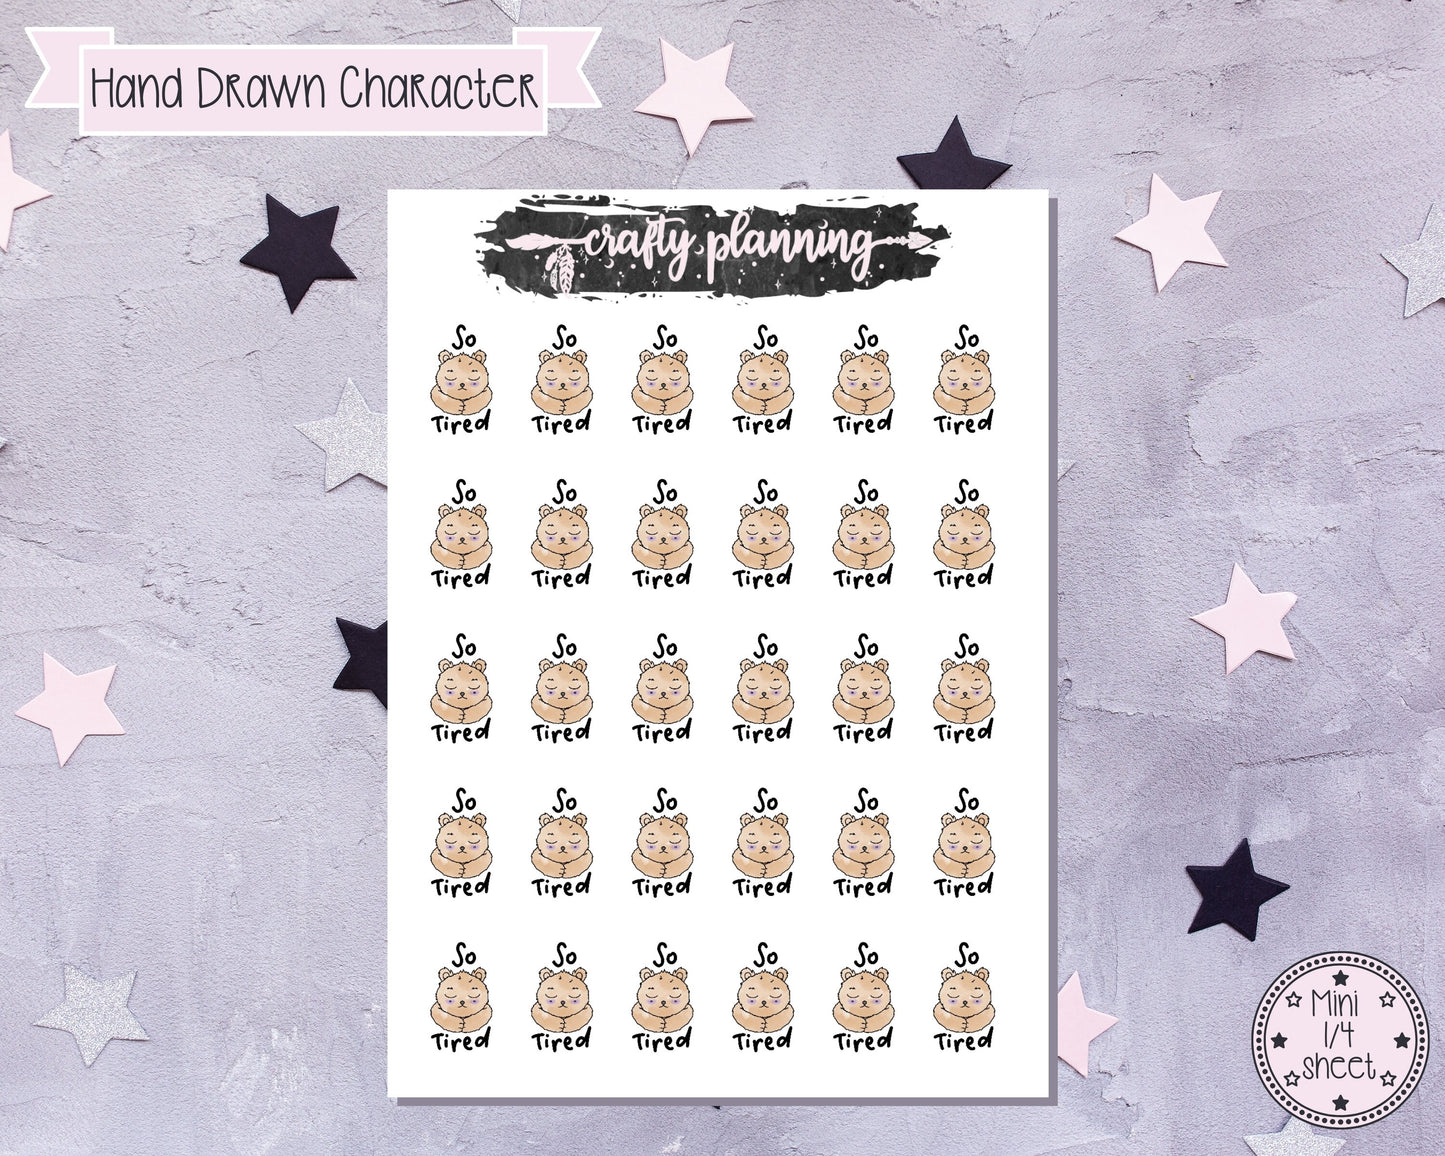 So Tired Stickers, Crafty Bear, Hand Drawn Character, Planner Stickers, Character Stickers, Mood Stickers, Mood Tracking, Insomnia Stickers